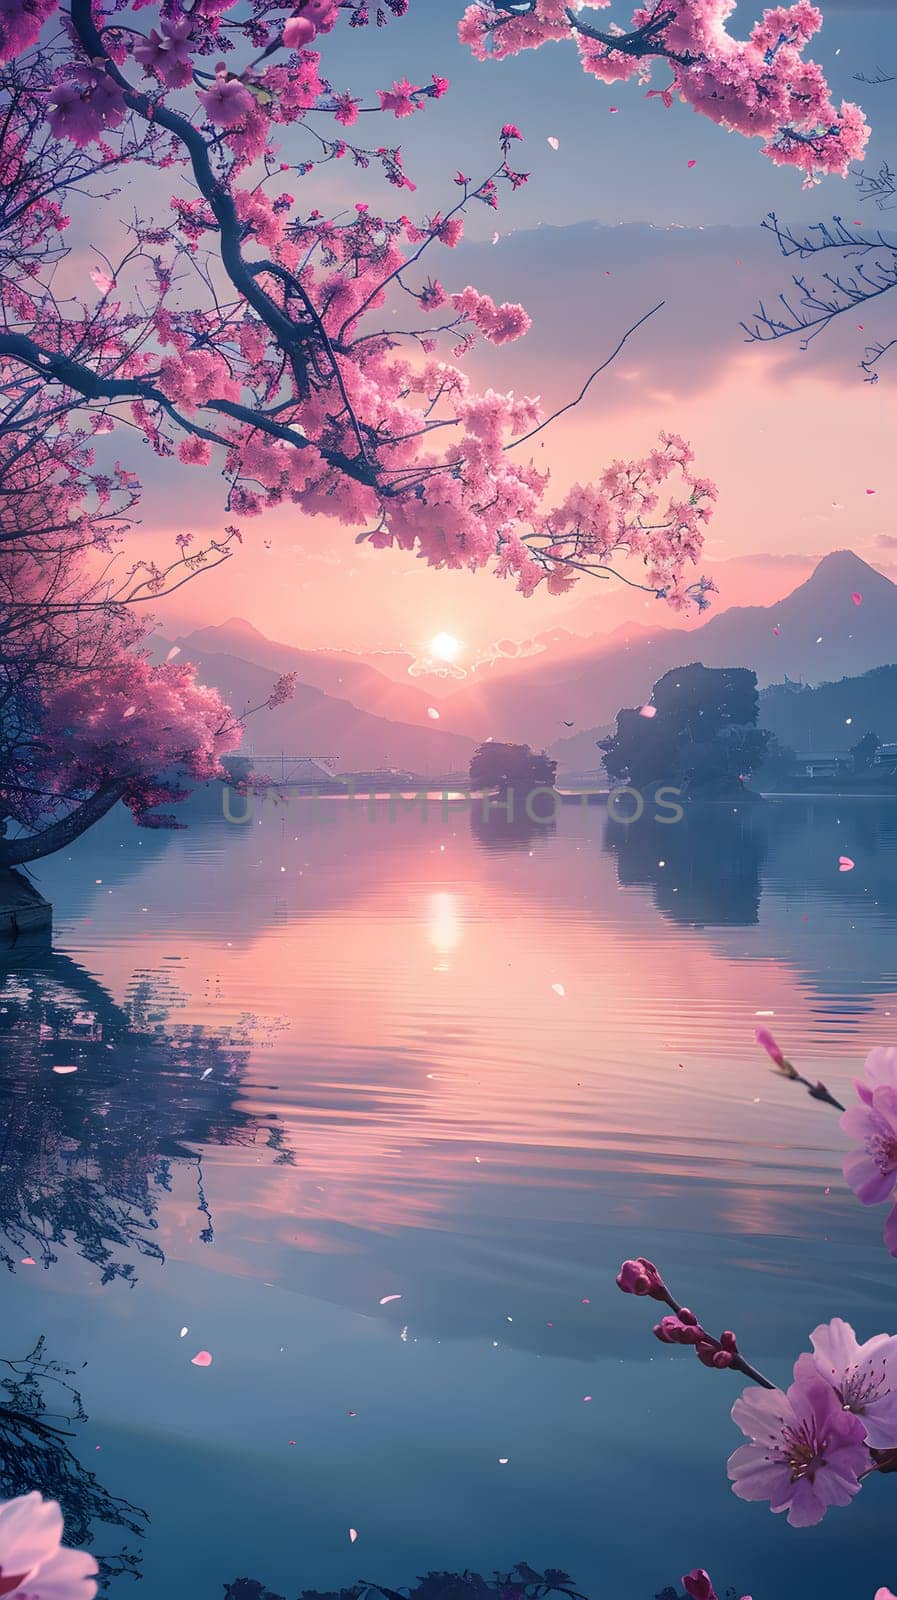 As the sun sets over the lake, cherry blossom trees create a stunning foreground against the colorful sky and reflected clouds on the waters surface, creating a serene natural landscape